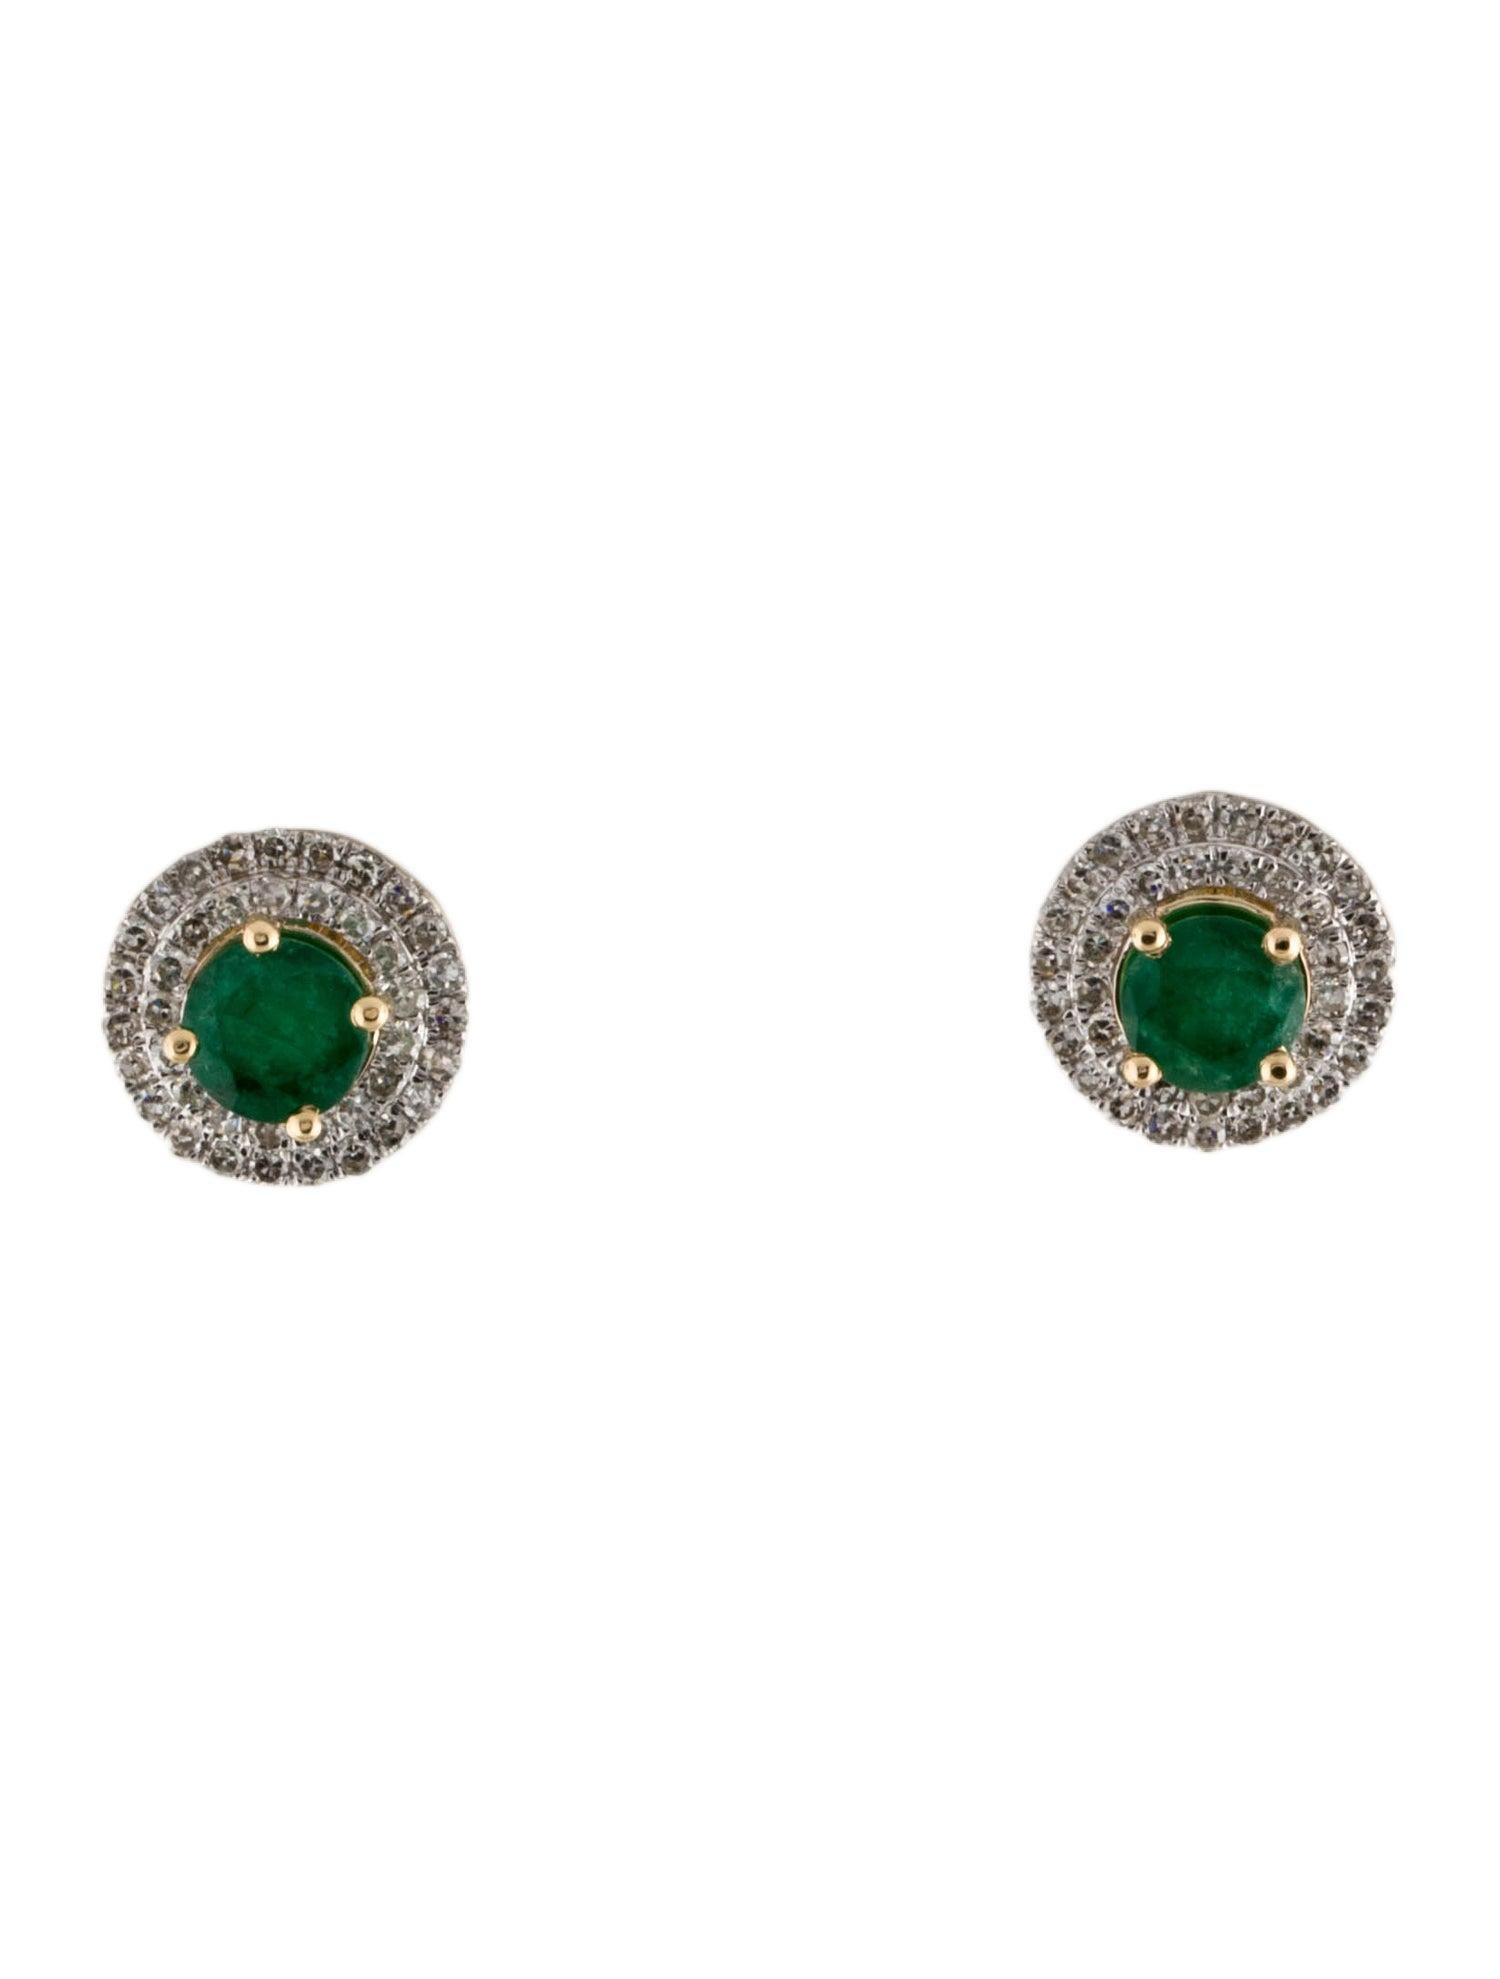 14K Emerald & Diamond Stud Earrings - Luxurious & Timeless Gemstone Jewelry In New Condition For Sale In Holtsville, NY